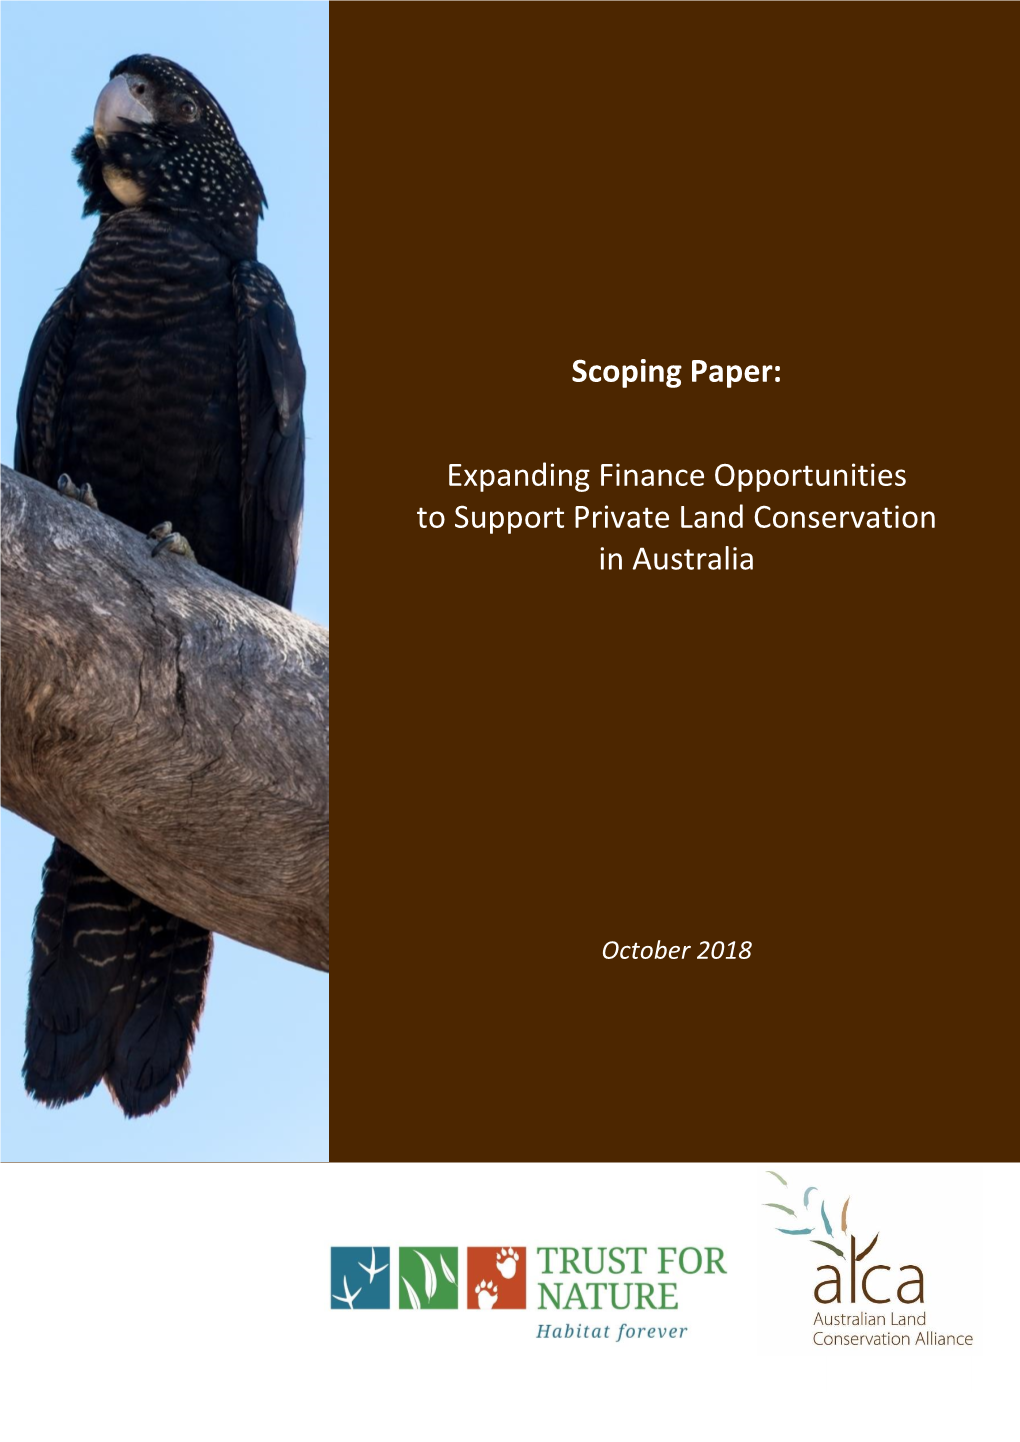 Expanding Finance Opportunities to Support Private Land Conservation in Australia